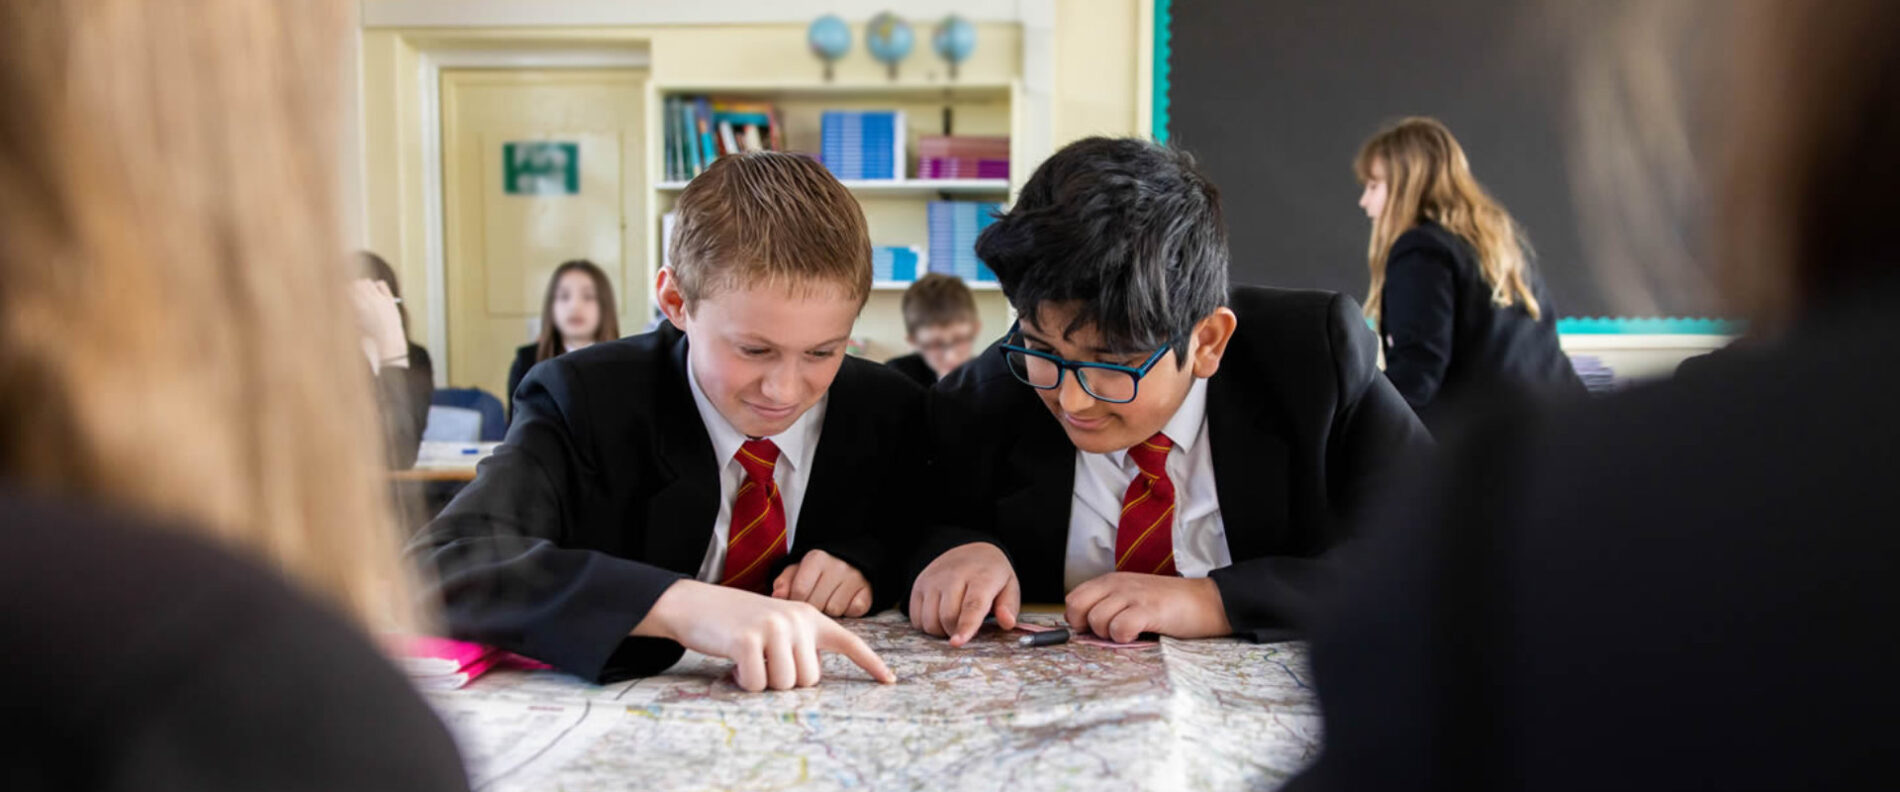 Geography students using a map in lesson